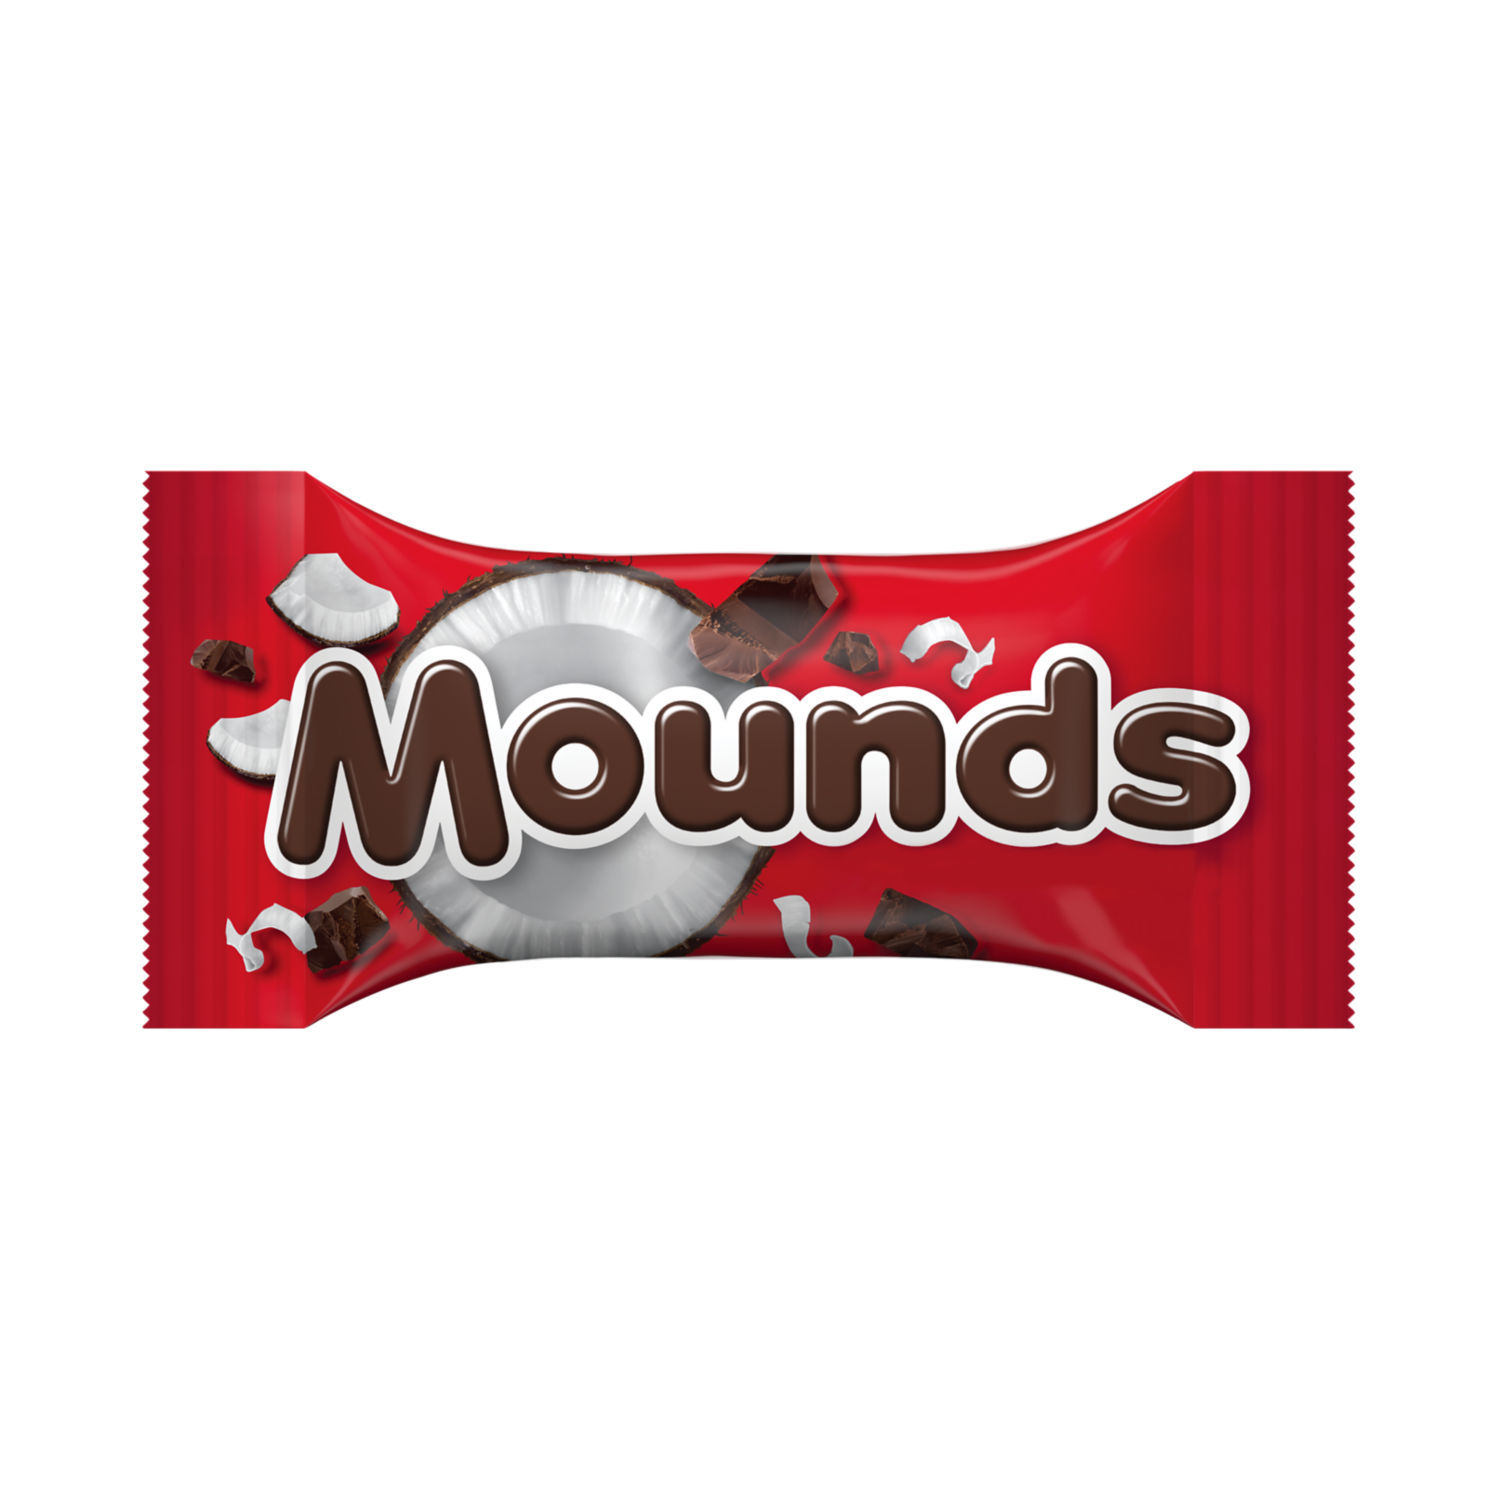 Mounds Dark Chocolate and Coconut Snack Size, Halloween Candy Bars Bag, 11.3 oz - image 3 of 7